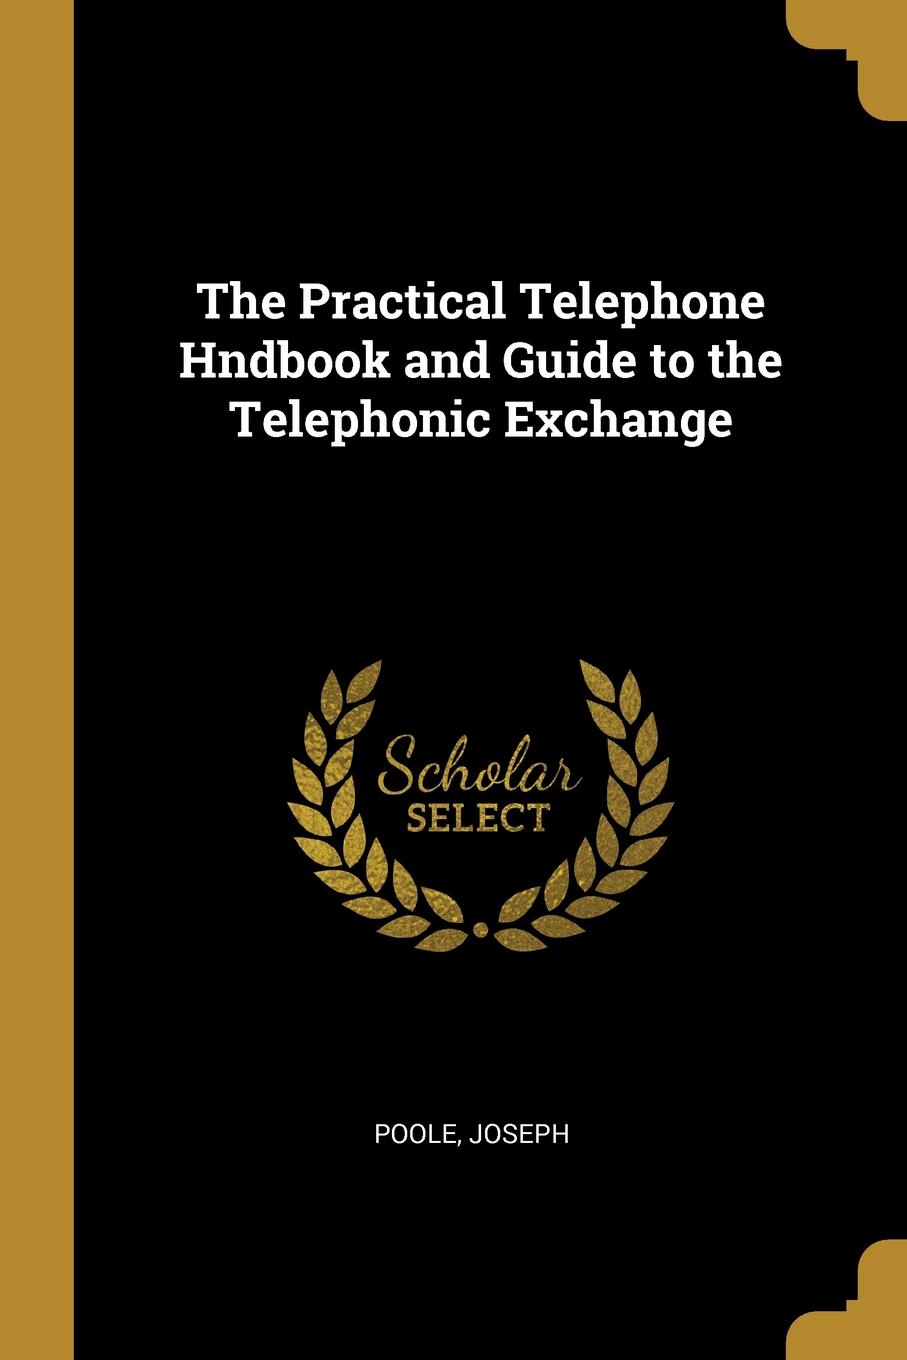 The Practical Telephone Hndbook and Guide to the Telephonic Exchange